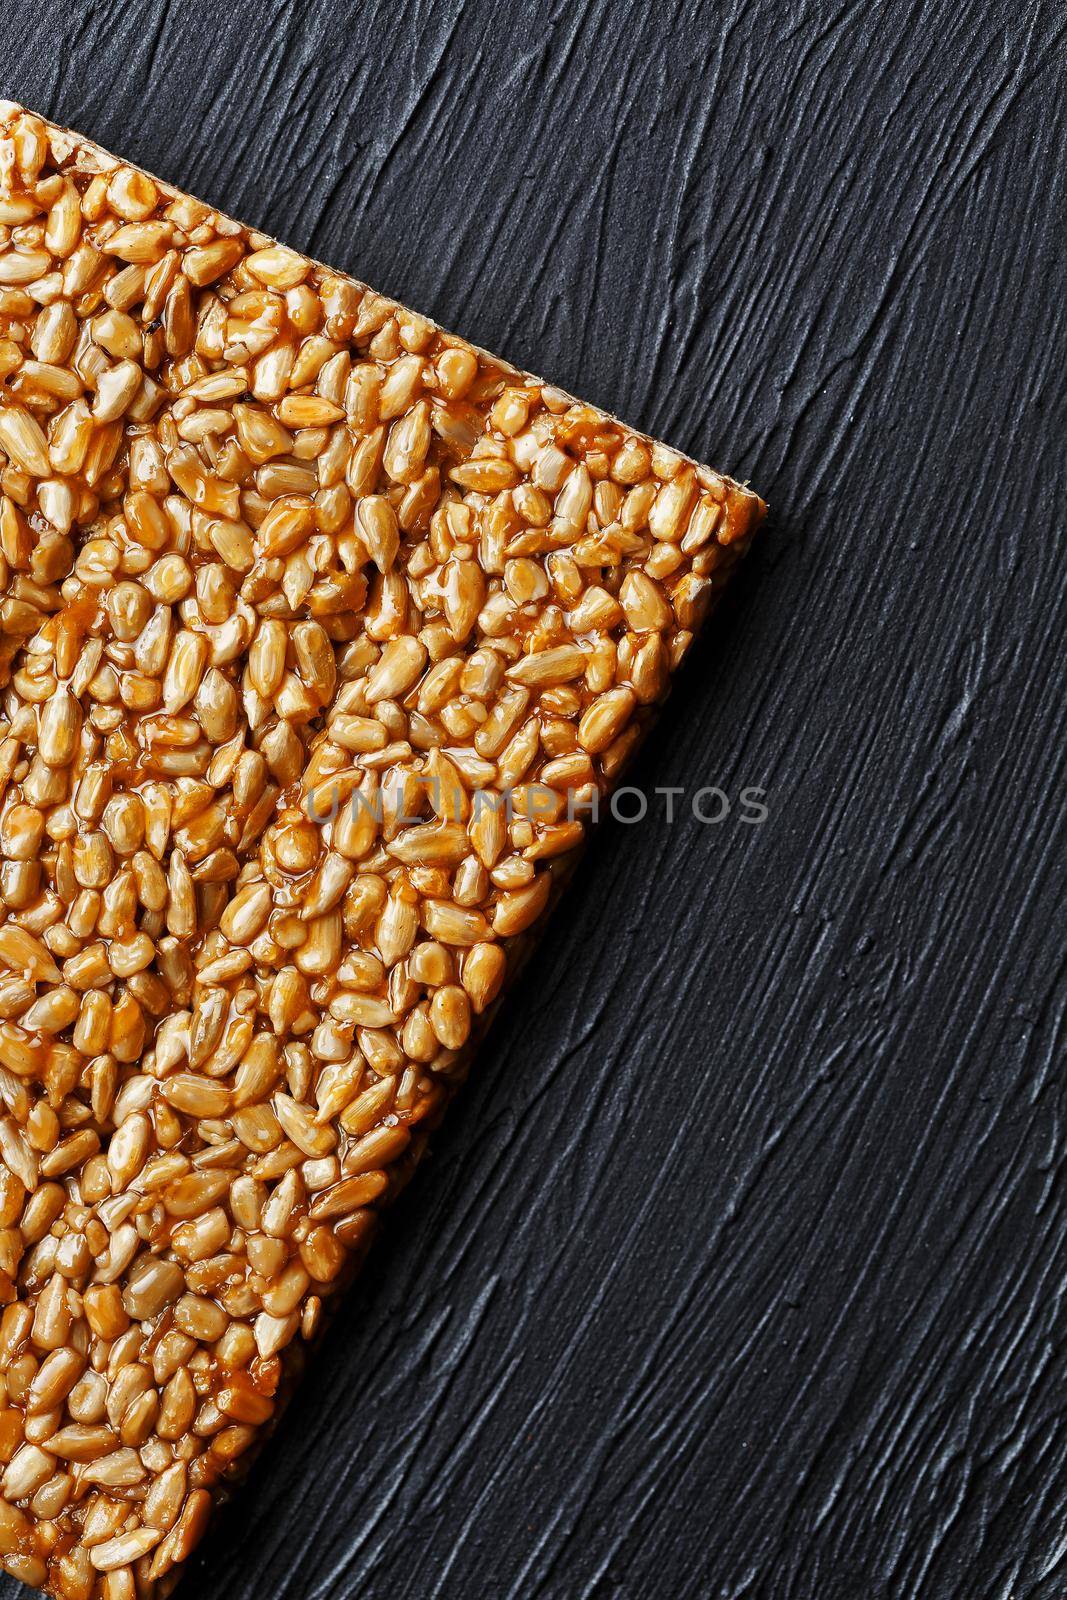 Tile kozinaki from sunflower seeds on a black textural background. Delicious oriental sweets Gozinaki from sunflower seeds, sesame seeds and peanuts, covered with honey with a shiny icing. View from above